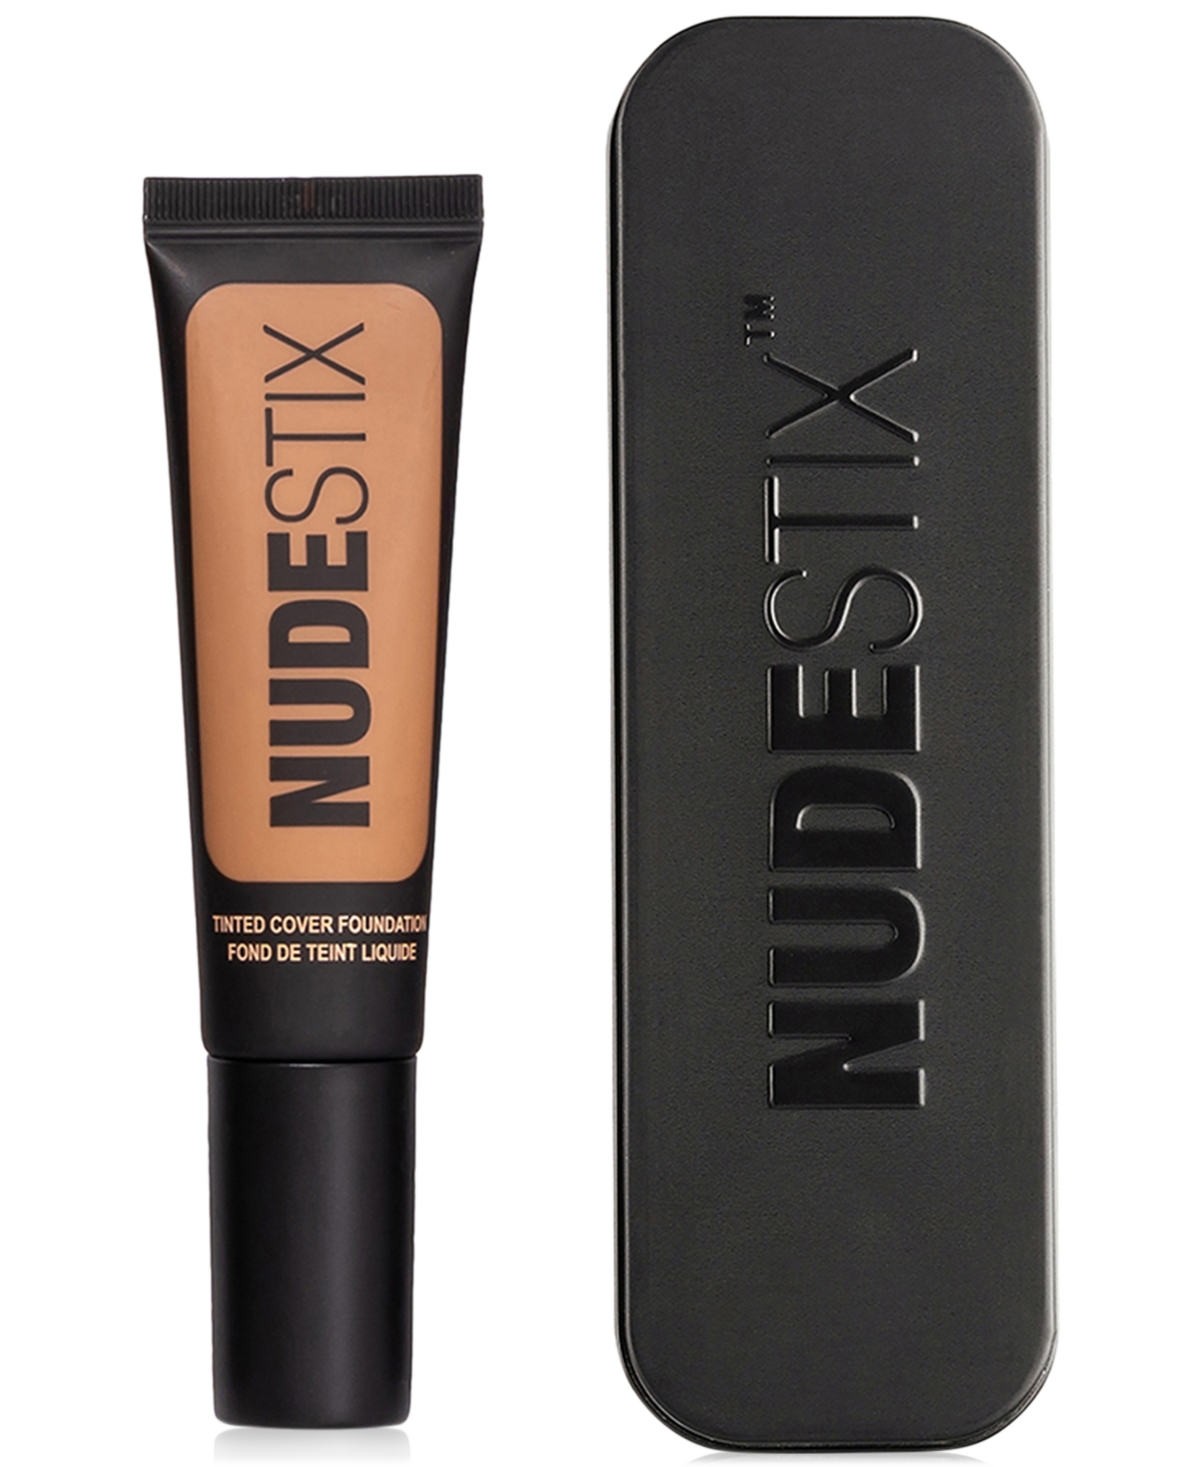 Tinted Cover Foundation, 0.68 oz. - NUDE  (deep neutral cool)